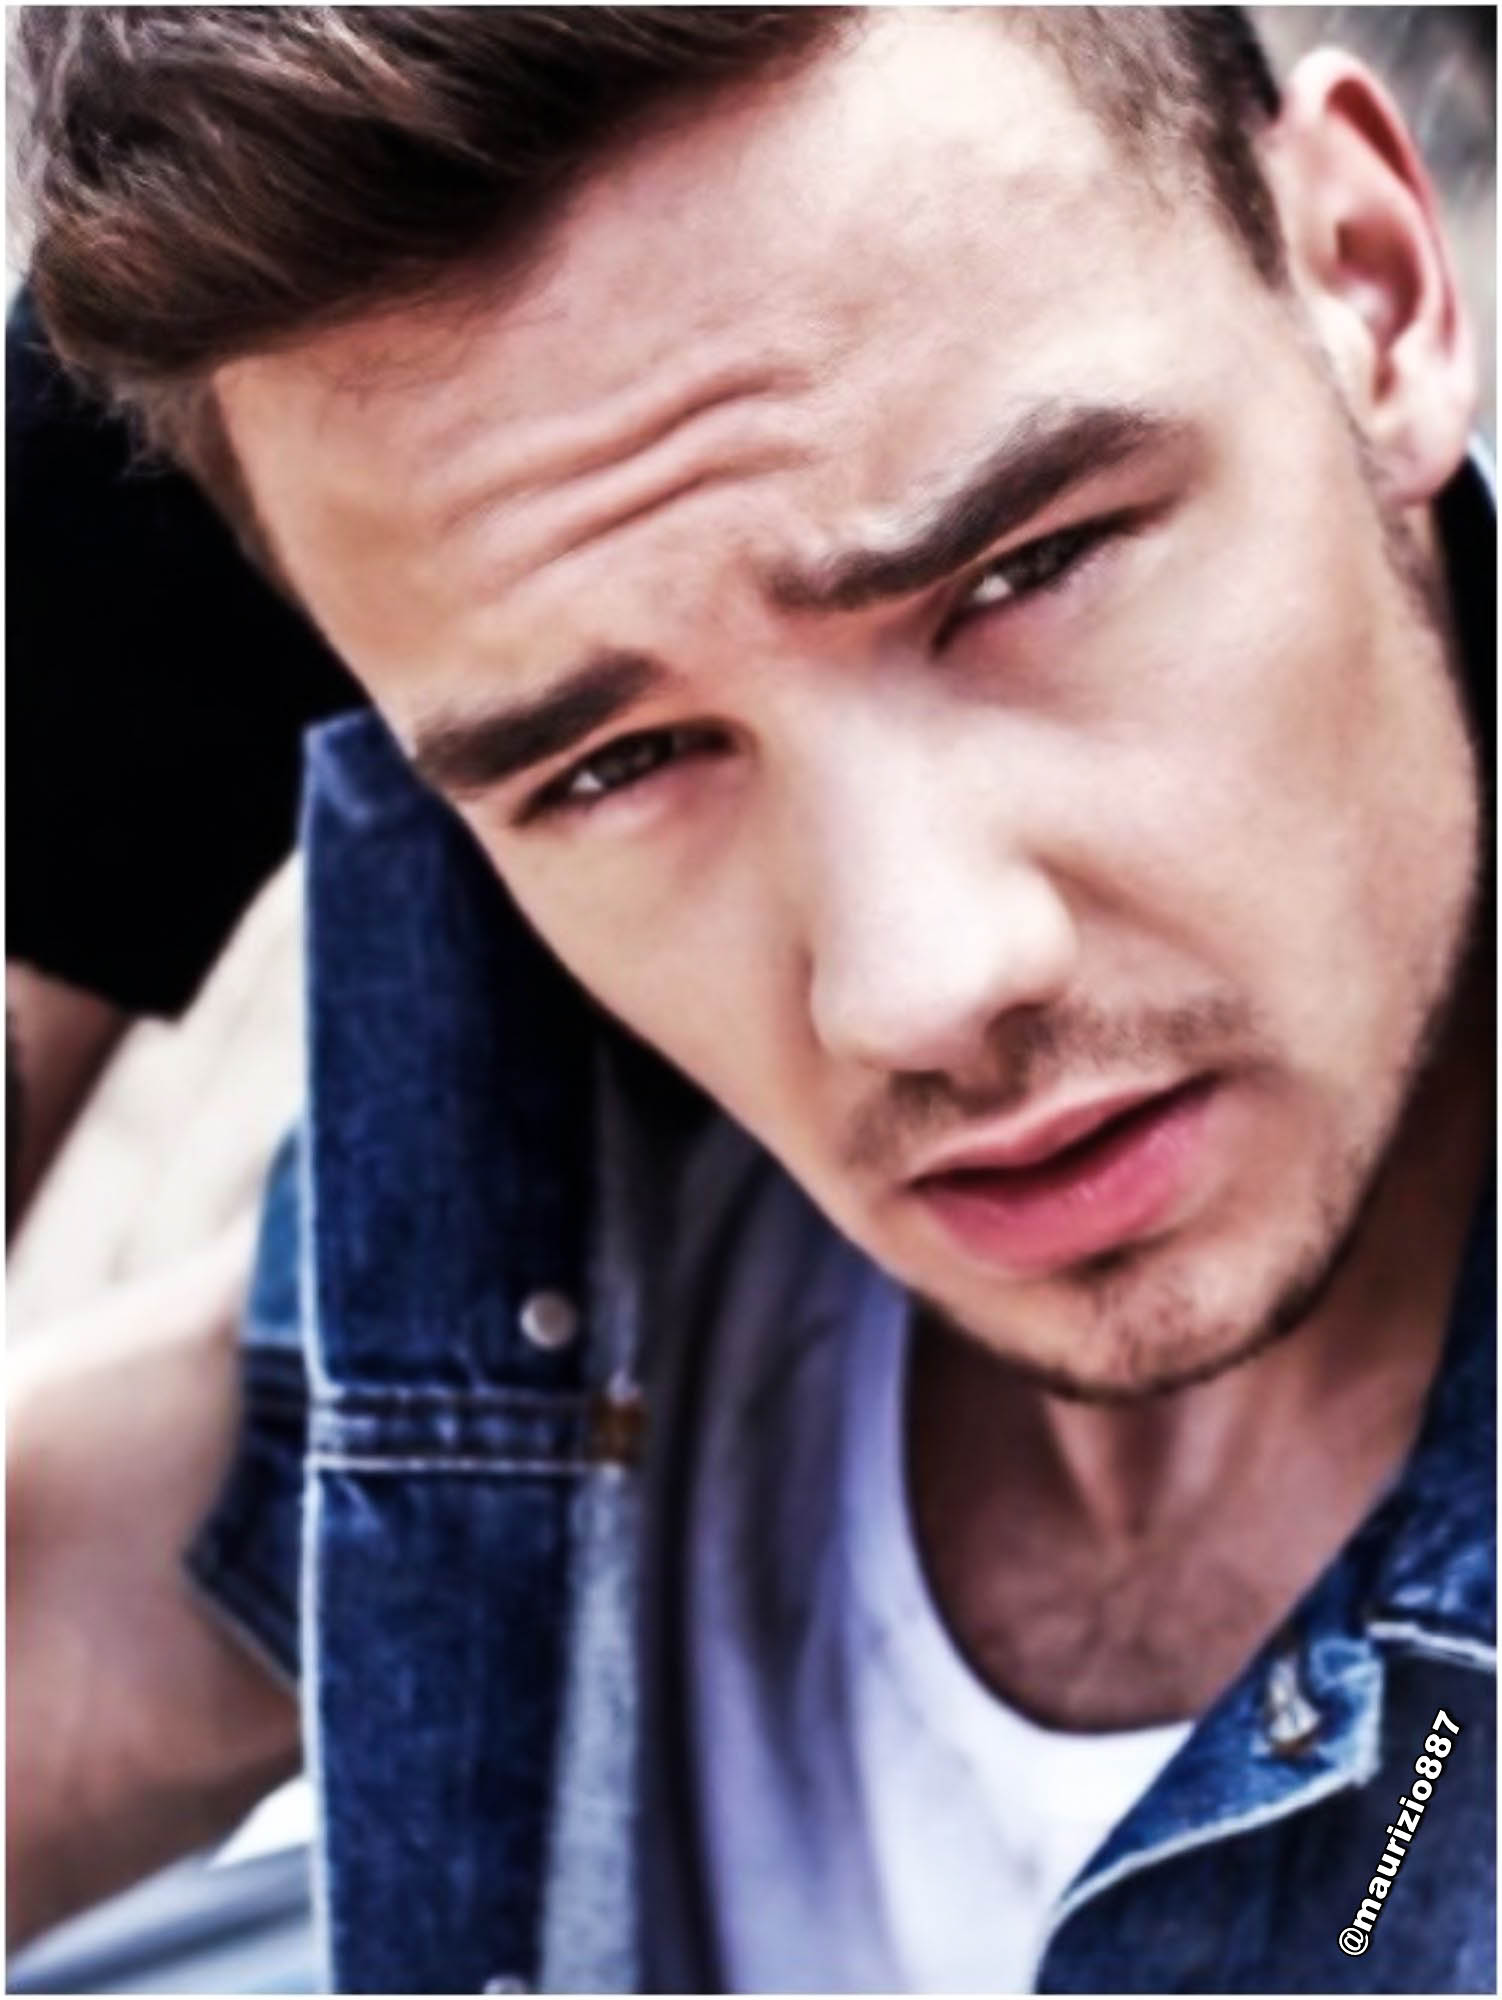 One Direction Liam Payne 2013 - HD Wallpaper 